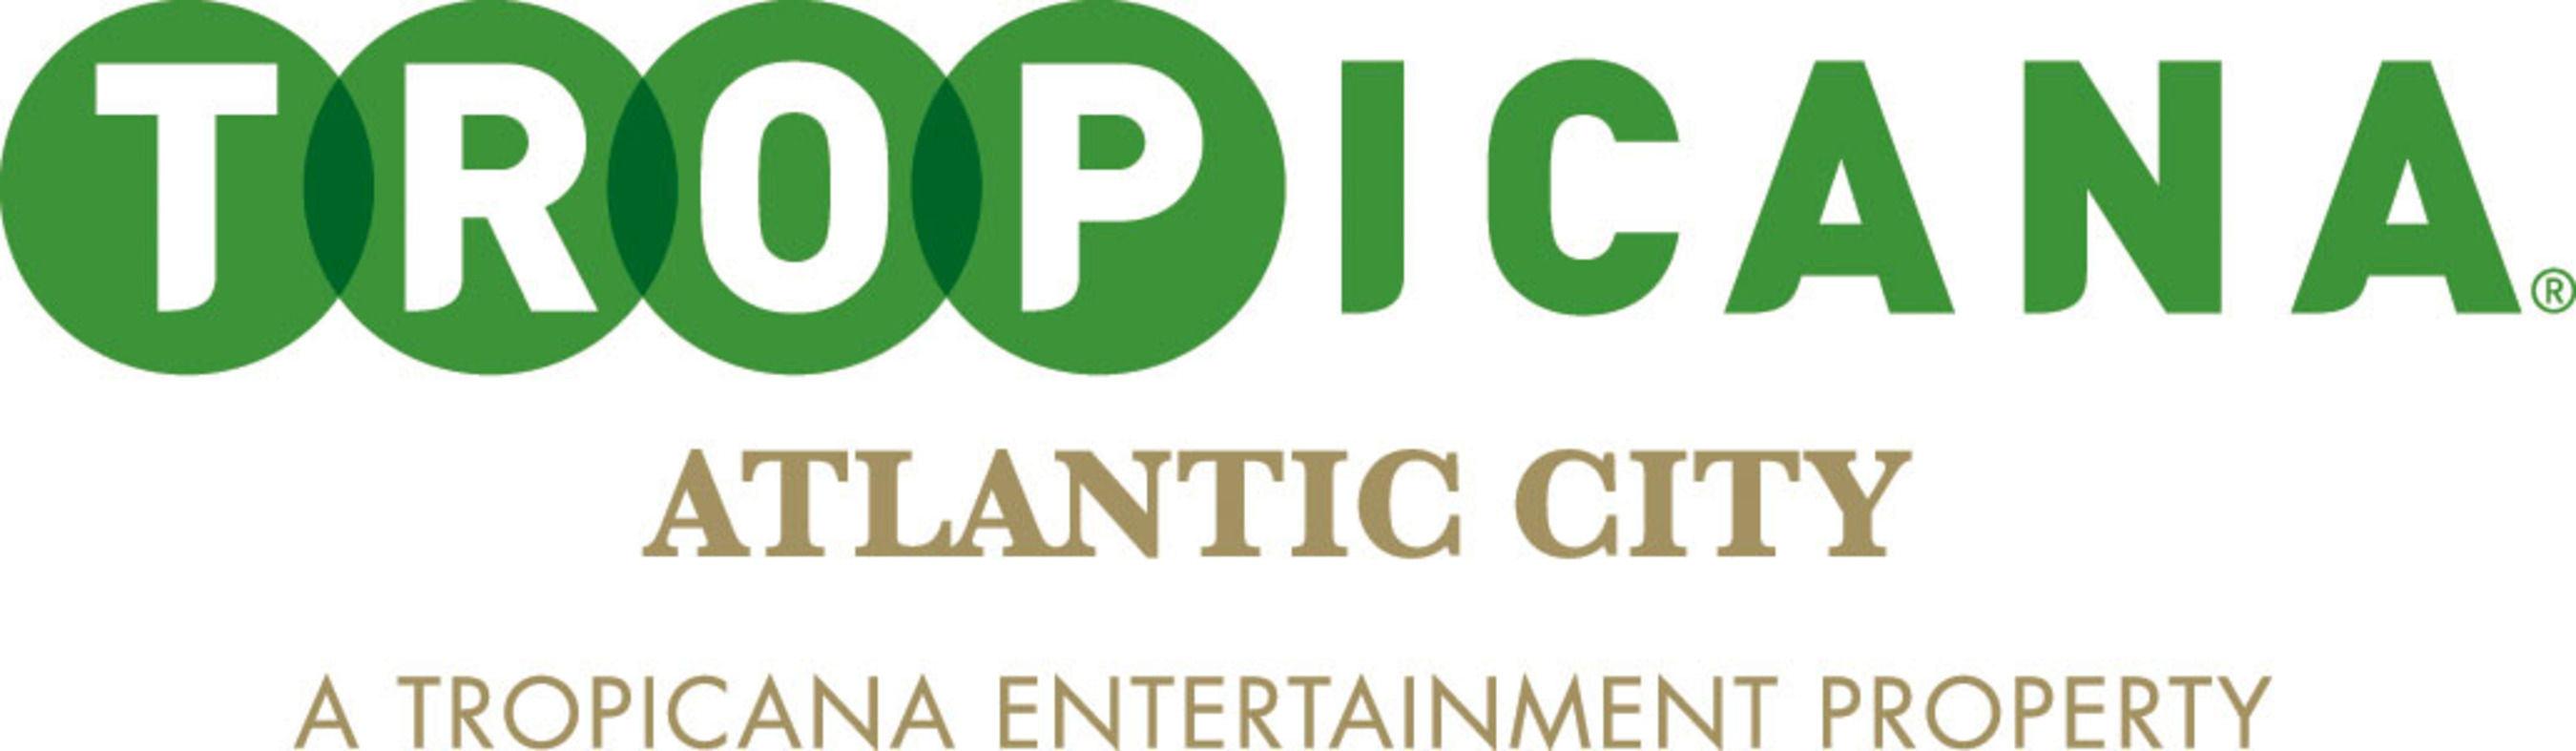 Tropicana Casino and Resort is a 24-hour gaming destination located on the beach and Boardwalk. Featuring 2,079 rooms and suites and home of The Quarter, a 200,000 square foot entertainment complex, Tropicana is the premier resort in Atlantic City. With 24 restaurants, 25 shops, 18 bars and lounges, 2 pools, an IMAX Theatre and a spa, Tropicana is consistently rated as the "Must-See Attraction" in Atlantic City. For more info visit www.tropicana.net.